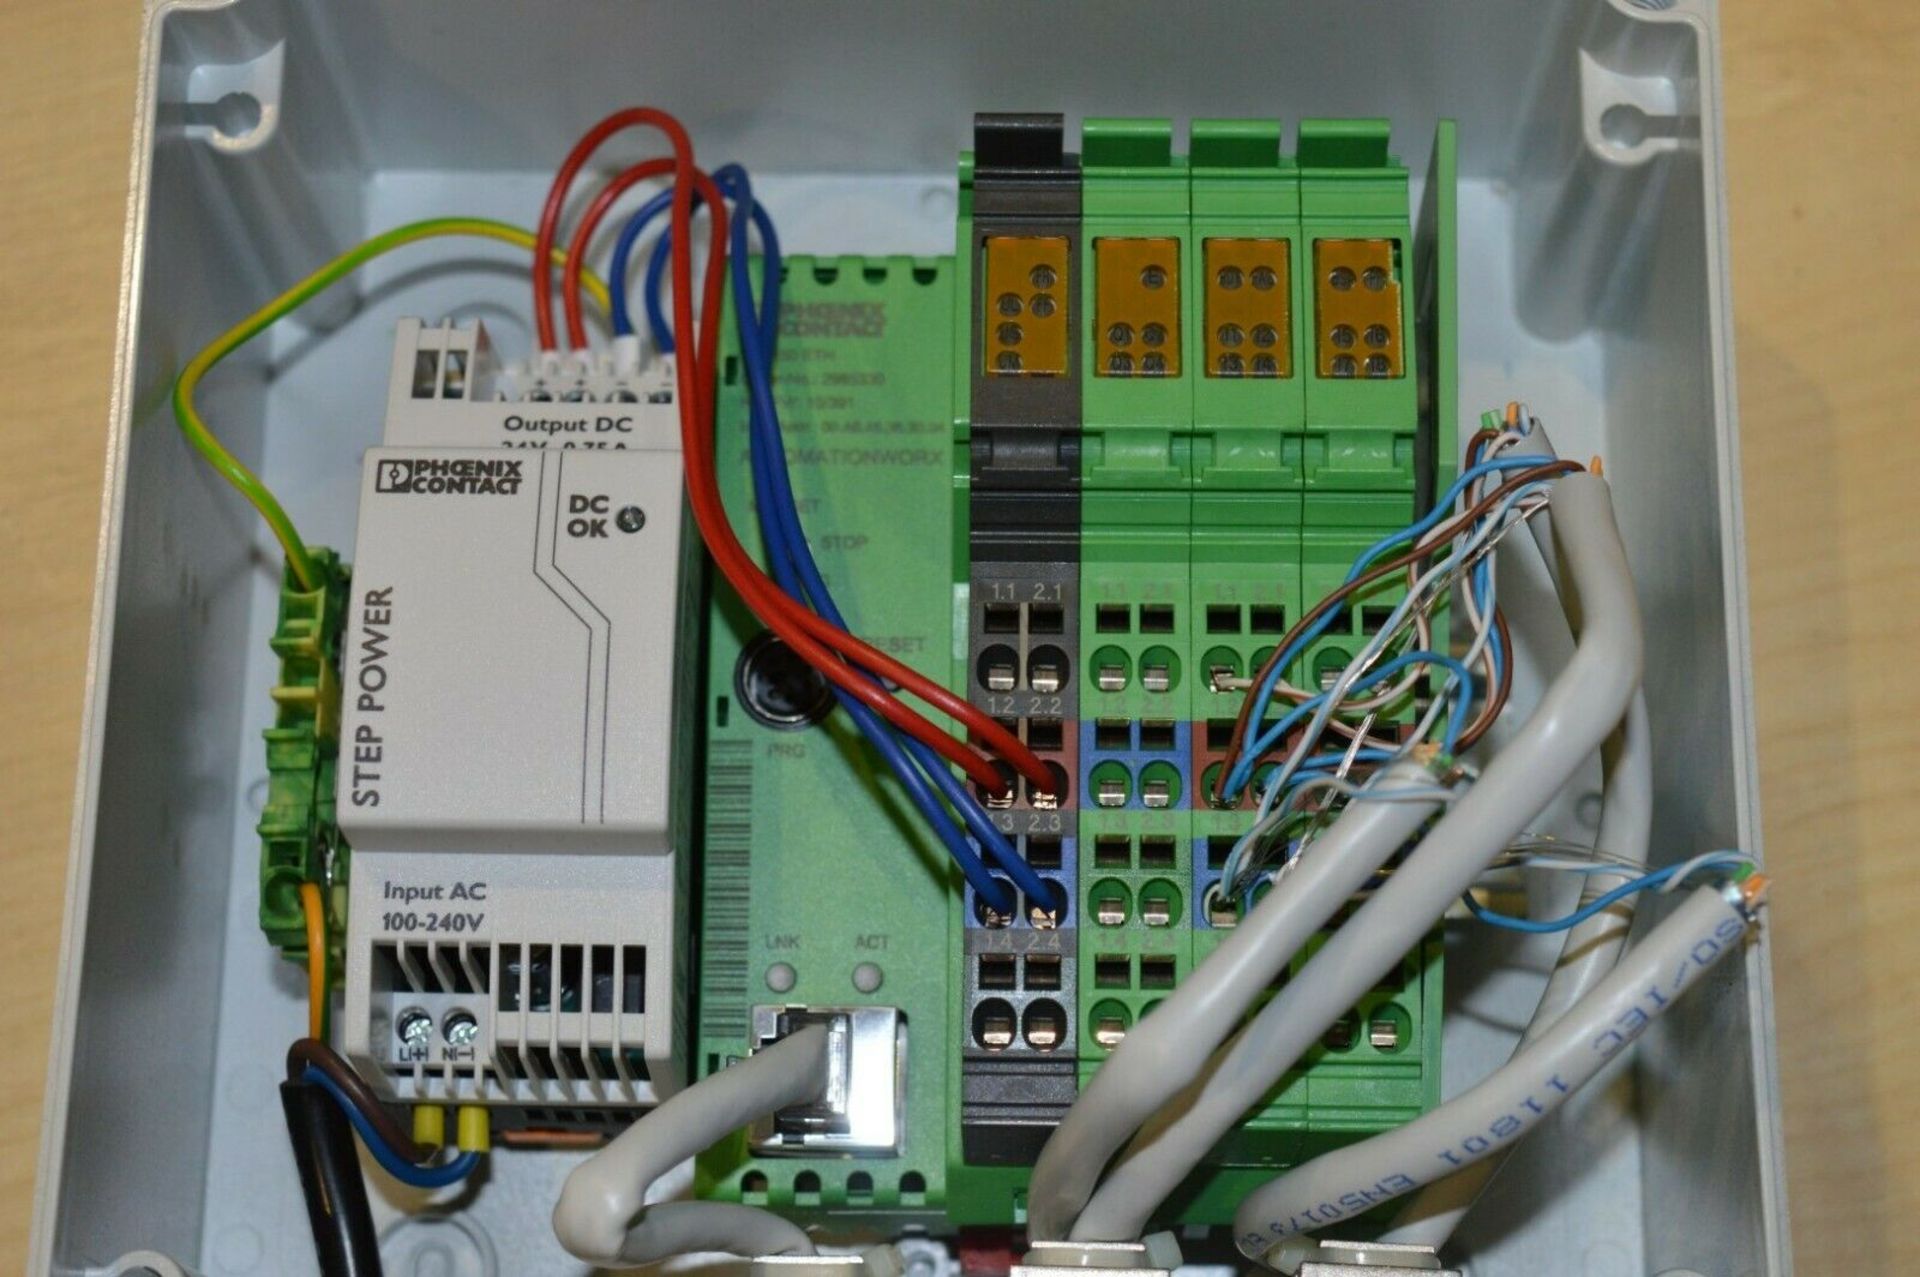 1 x Phoenix Contact Controller ILC 150 ETH 2985330 + Step Power and Enclosure - 240v UK Plug - WH1 - - Image 4 of 7